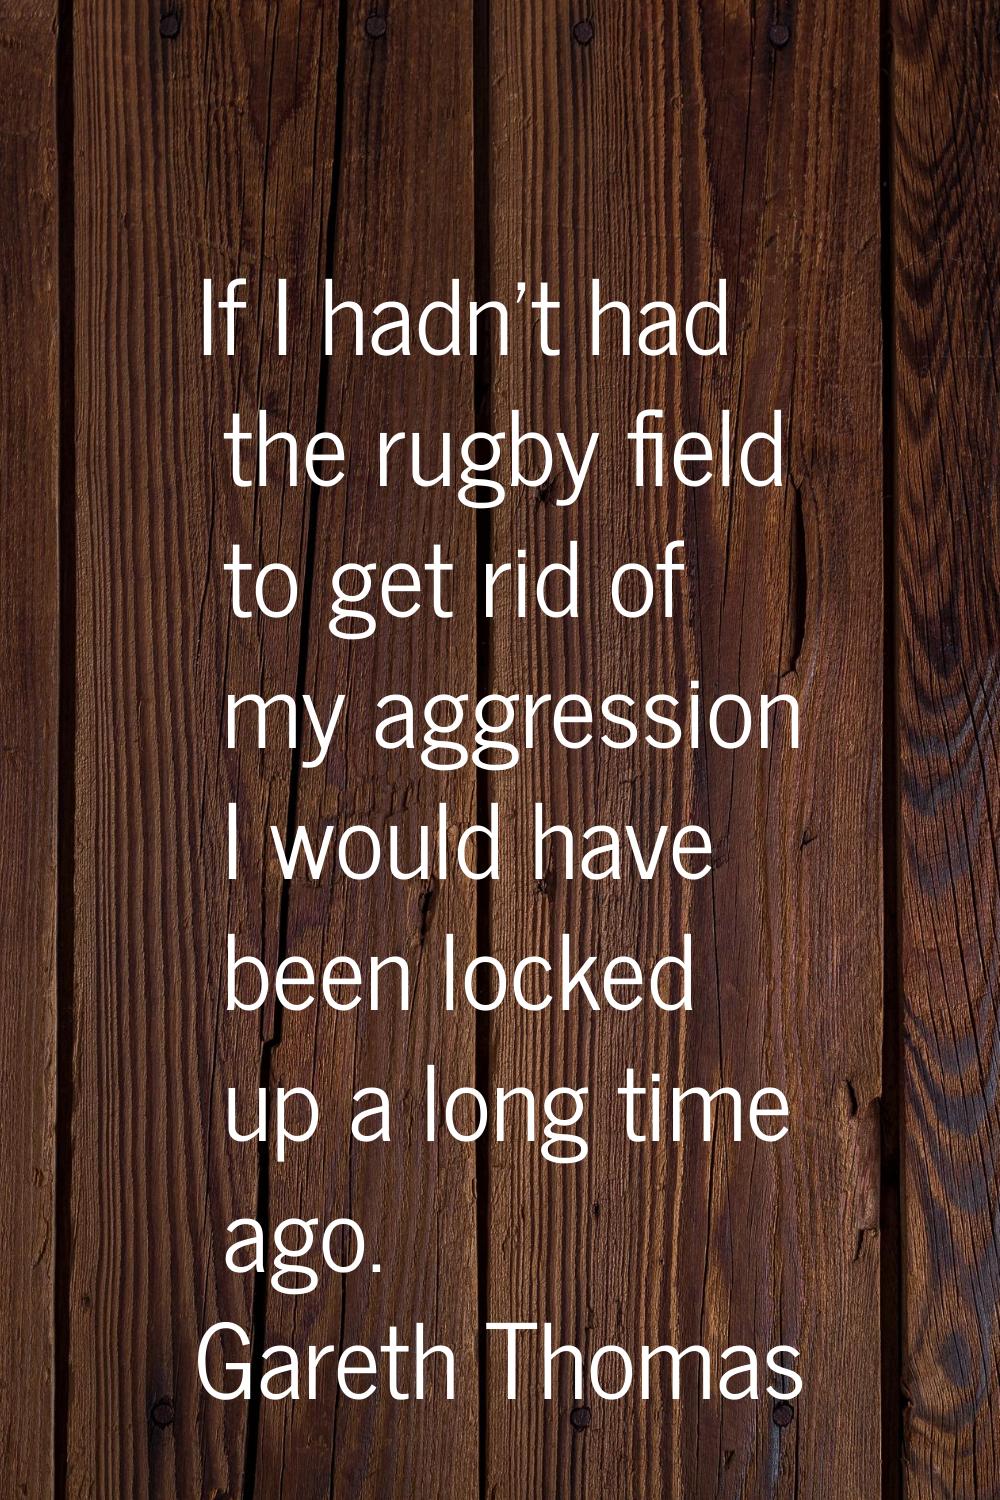 If I hadn't had the rugby field to get rid of my aggression I would have been locked up a long time